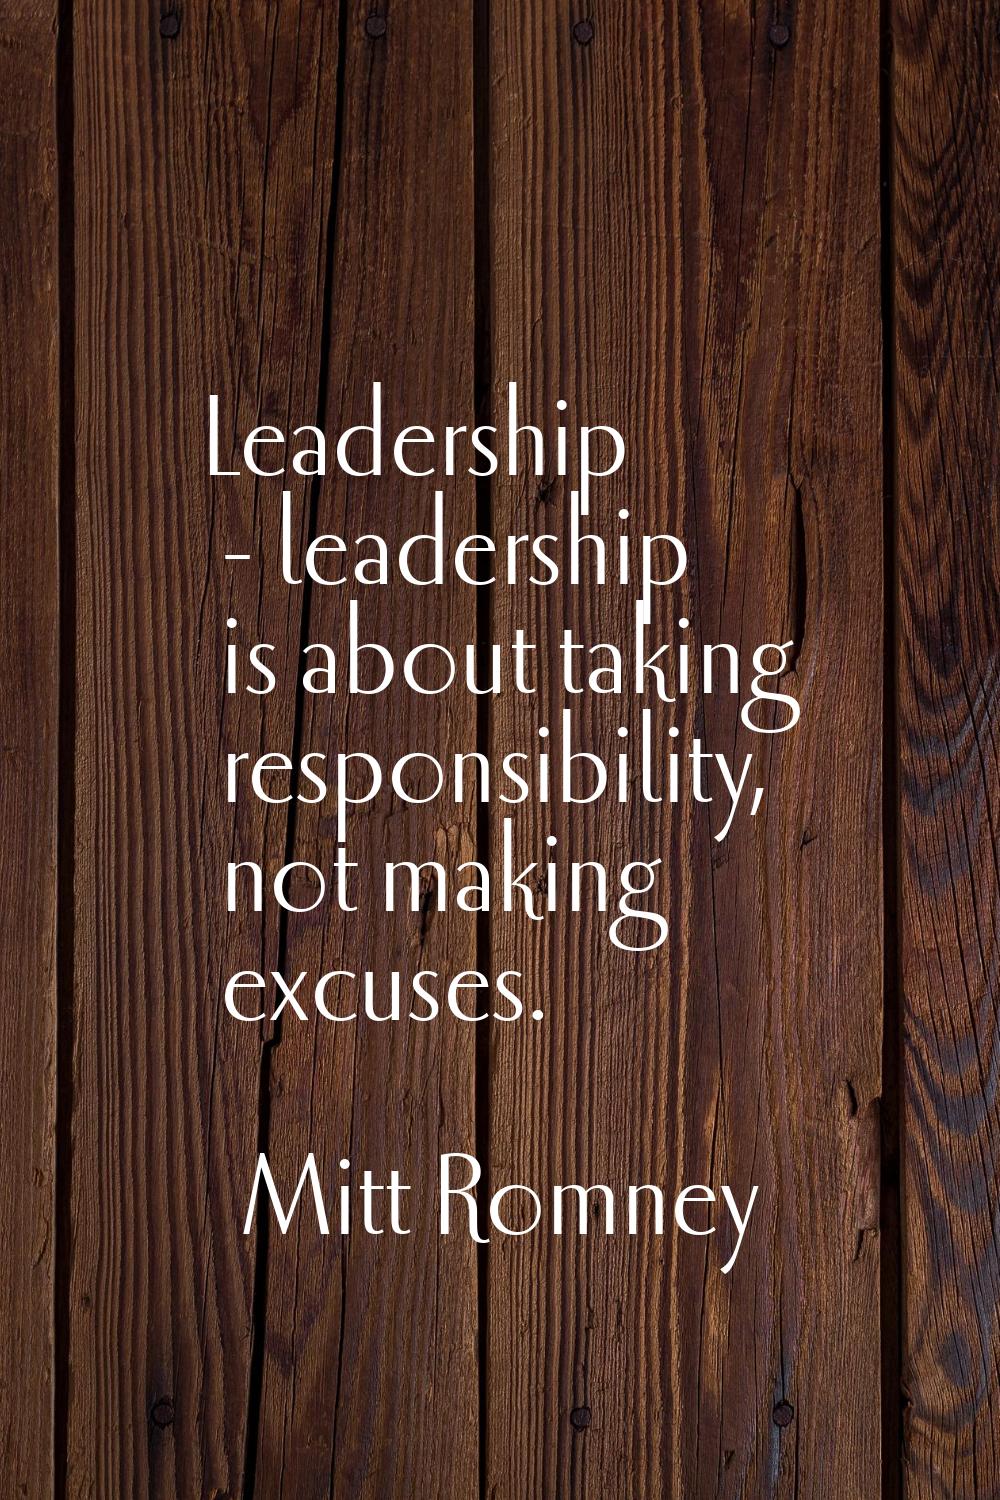 Leadership - leadership is about taking responsibility, not making excuses.